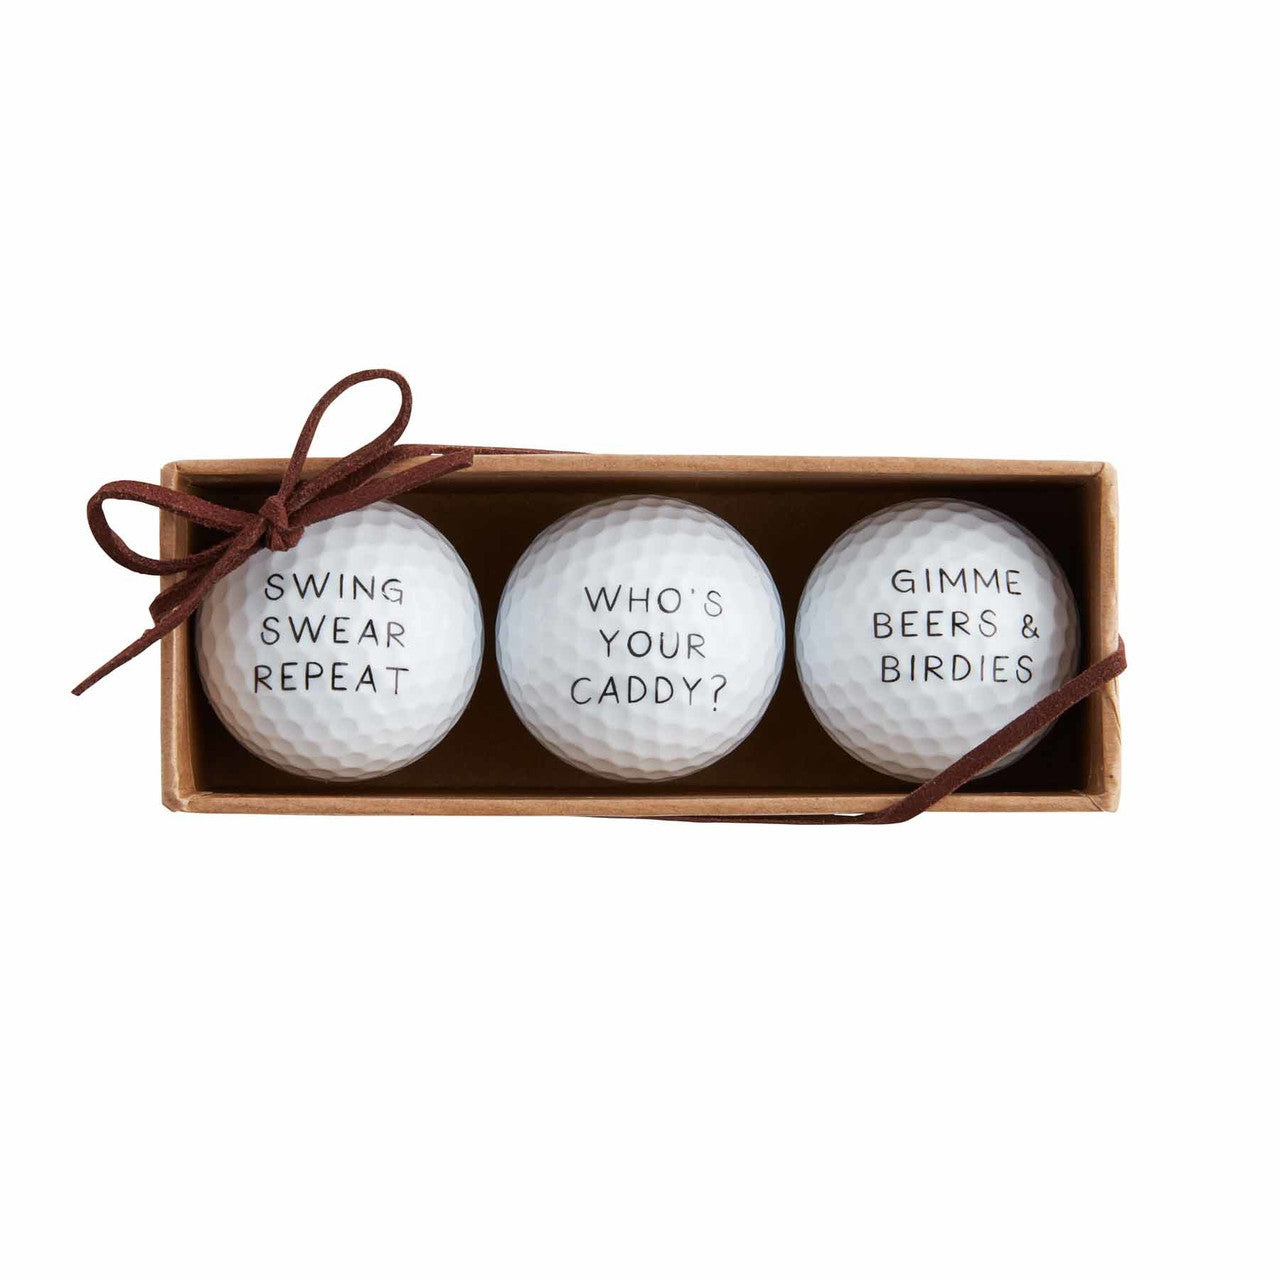 Whos Your Caddy Golf Ball Set